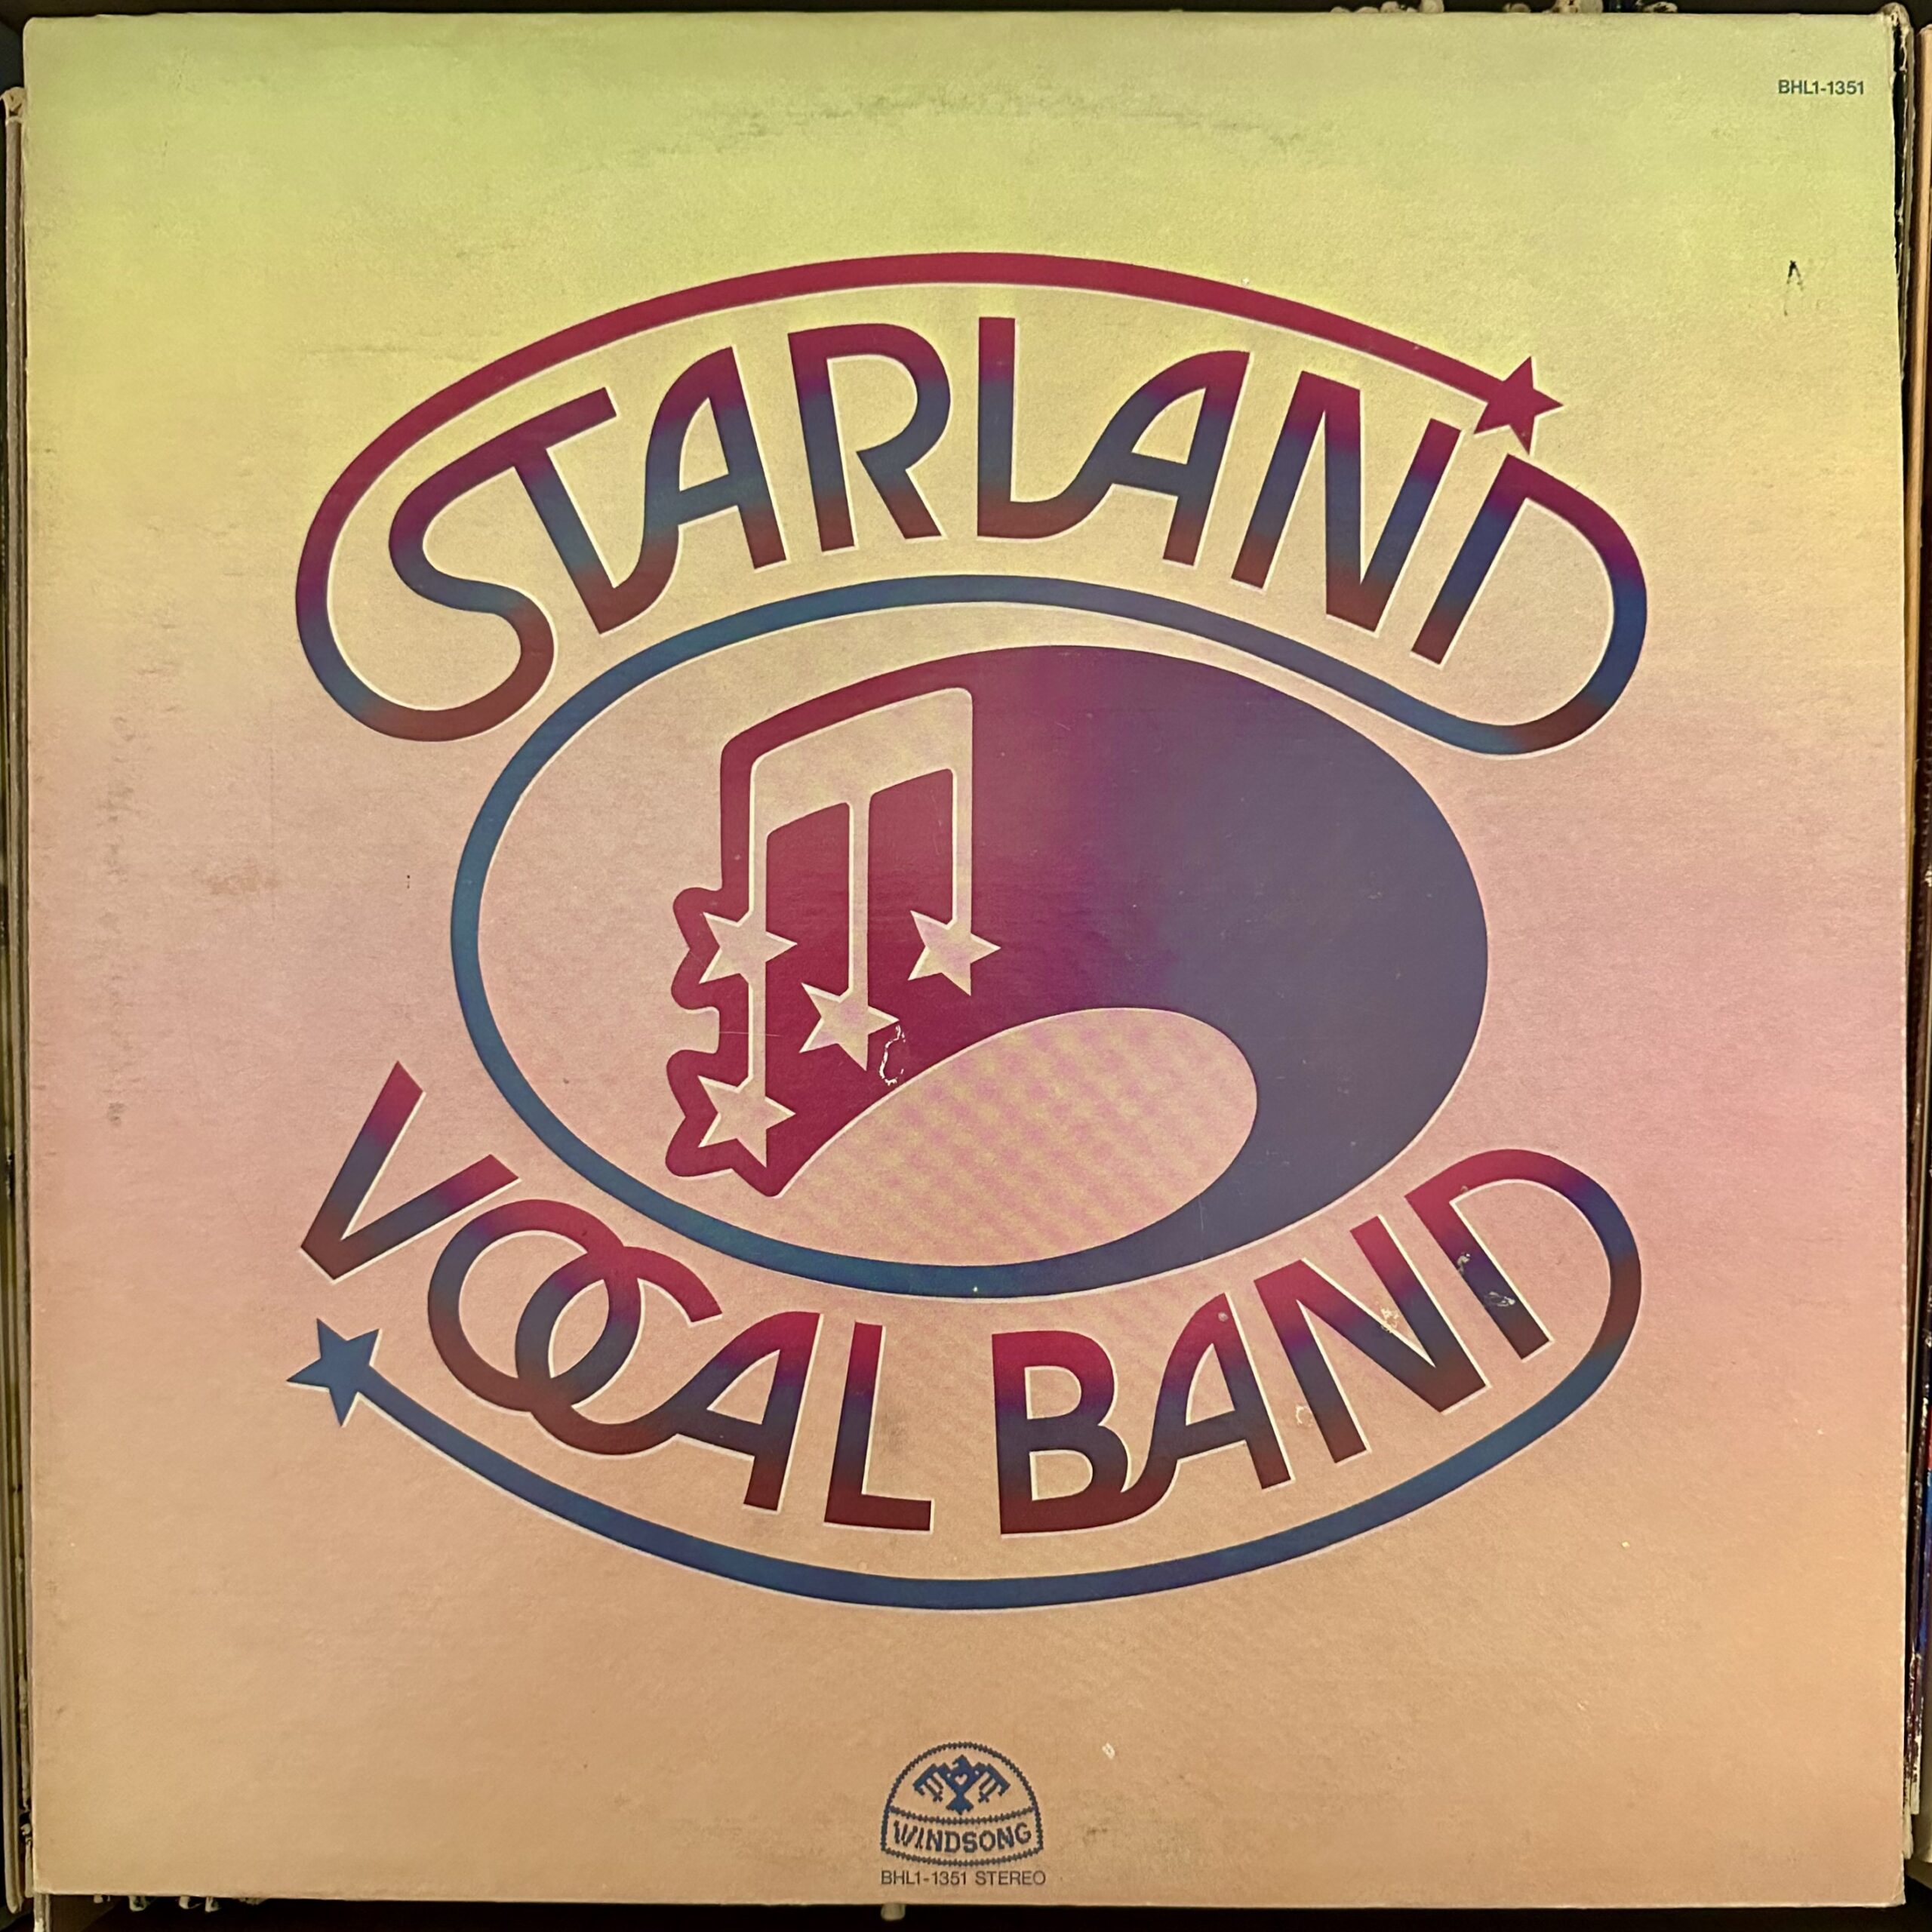 Starland Vocal Band (1976)